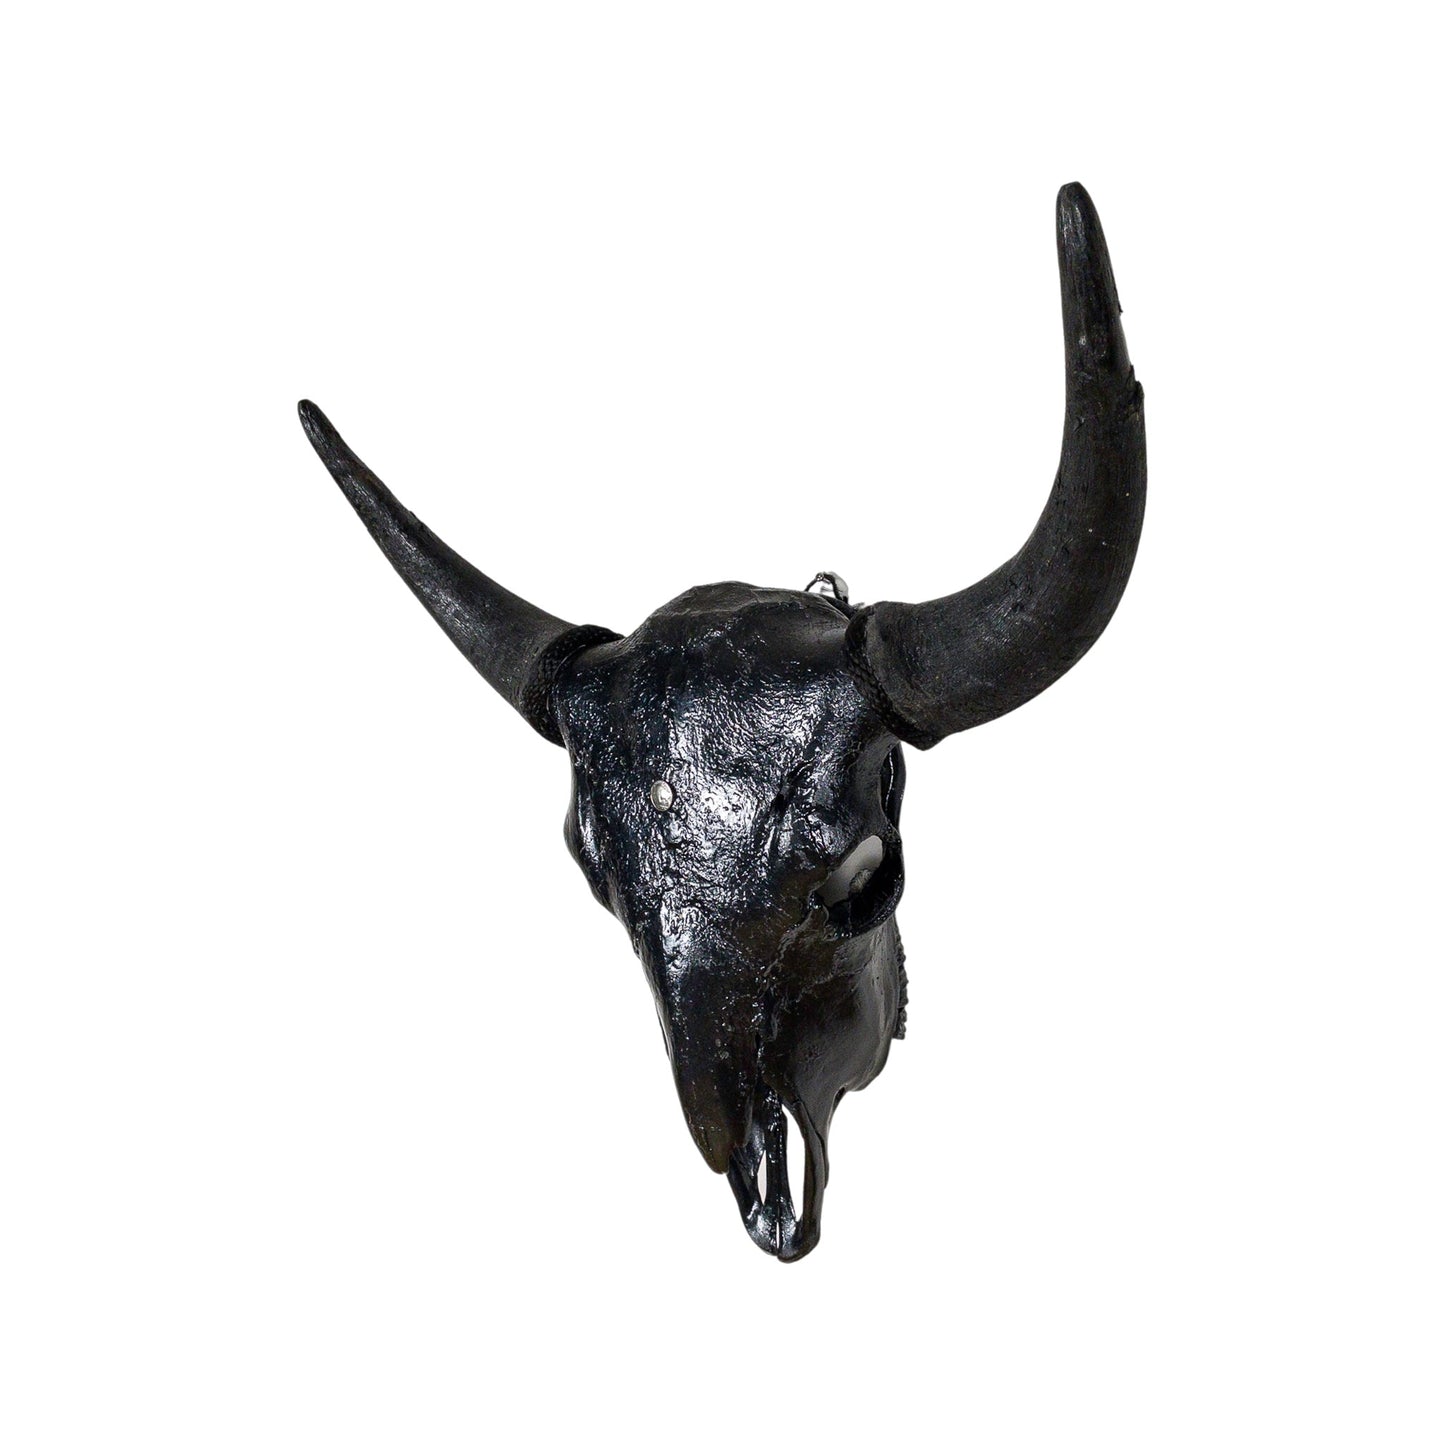 A Home Decor Taxidermy Bison Black Hammered Finish Painted Skull of Grade Respectable